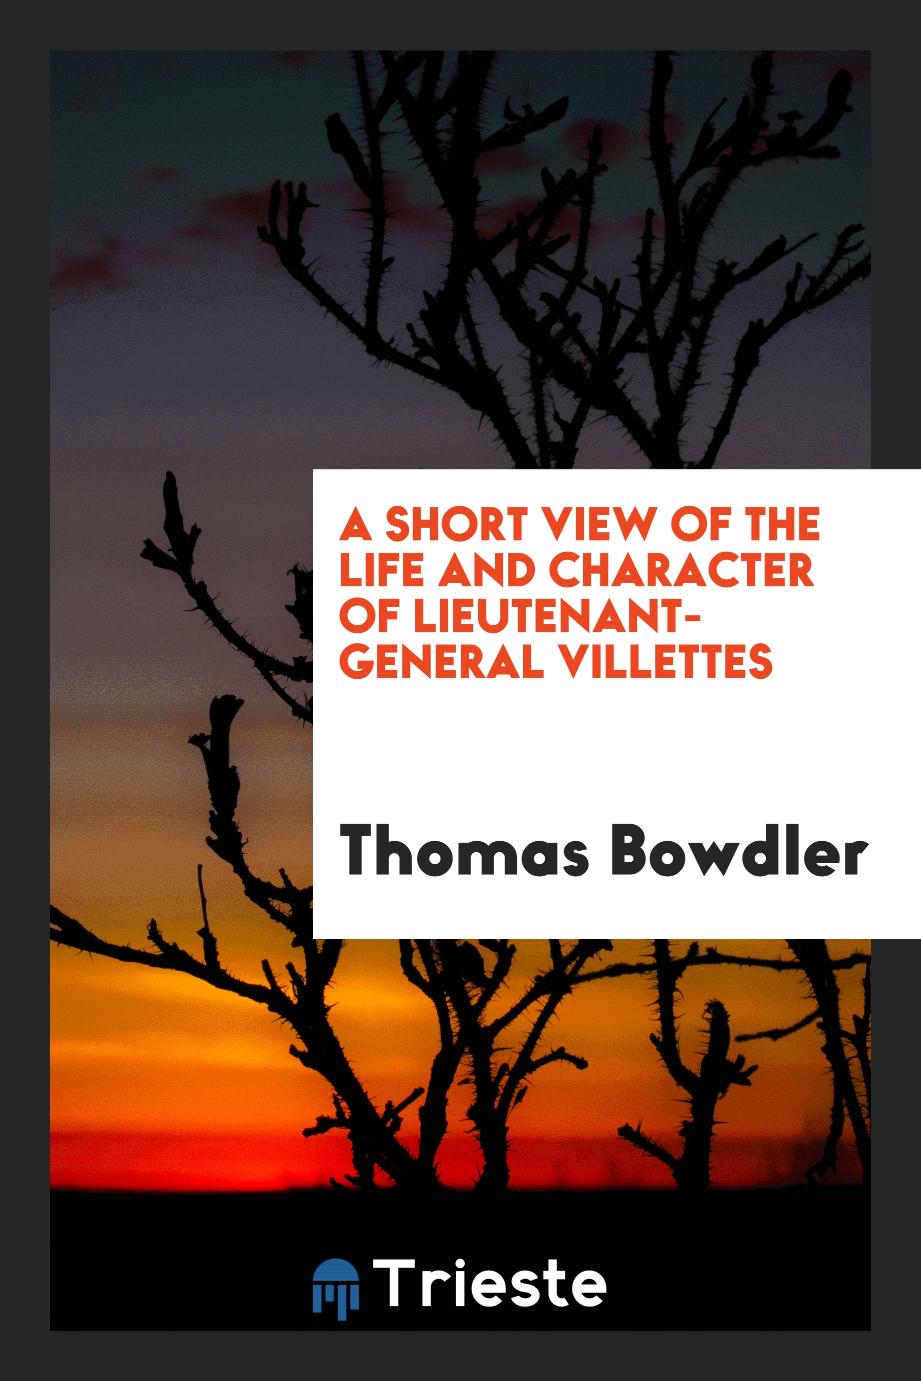 A Short View of the Life and Character of Lieutenant-General Villettes